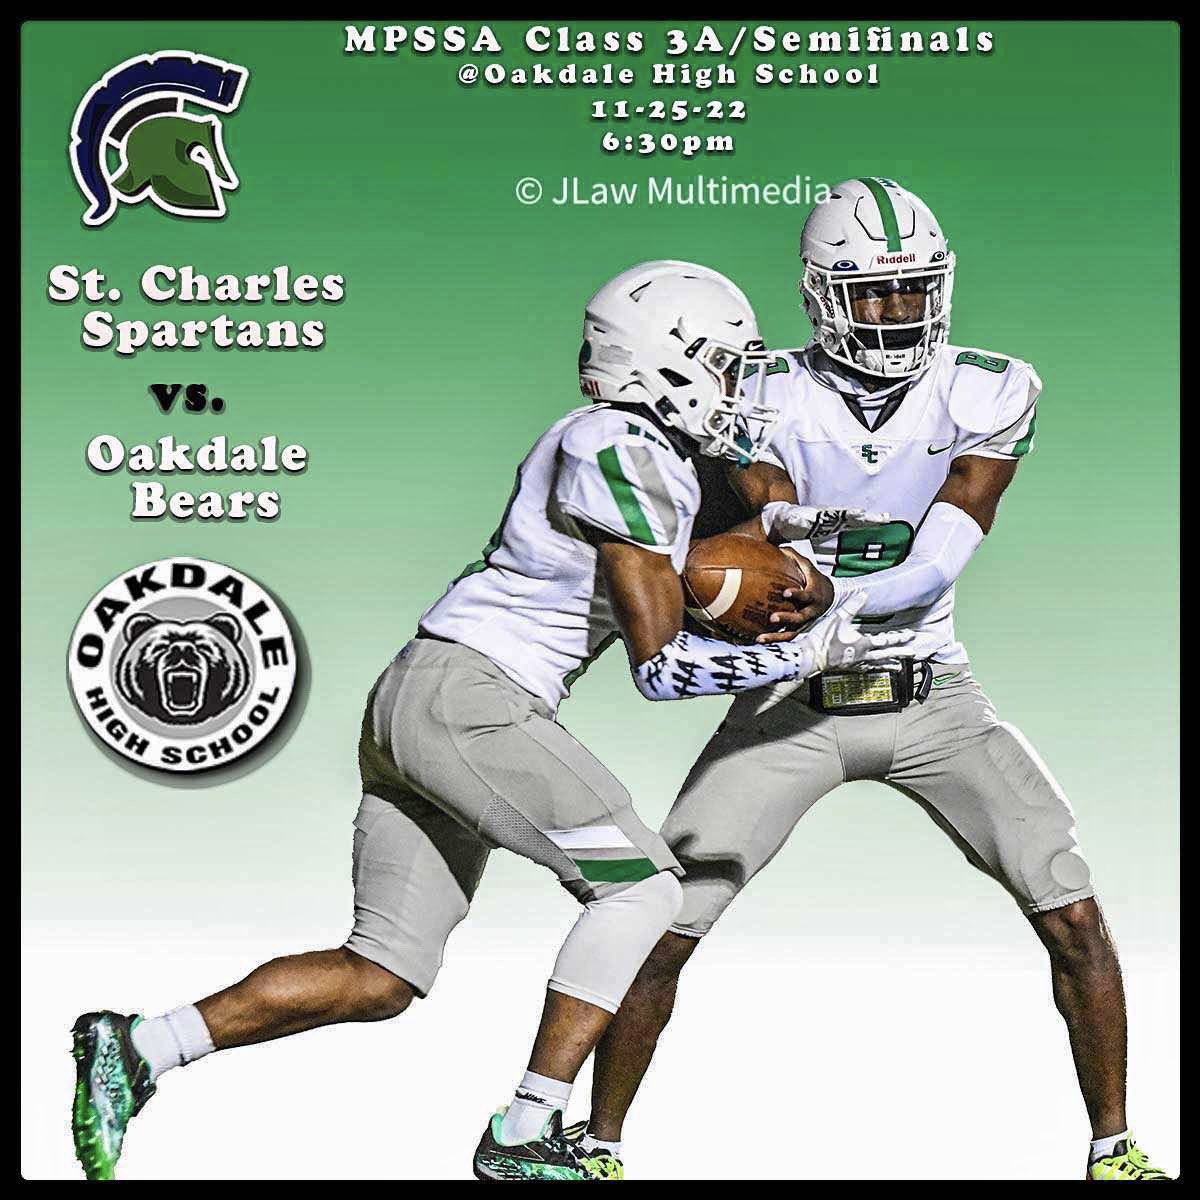 MPSSA Playoffs Class 3A Semifinals. St. Charles Spartans vs Oakdale Bears this Friday (6:30pm) at Oakdale High School. @SMAC_Football @StCharles_FB #stcharlesspartans #mpssa #oakdalehighschool #fridaynightlights #southernmaryland #highschoolfootball #actionsports